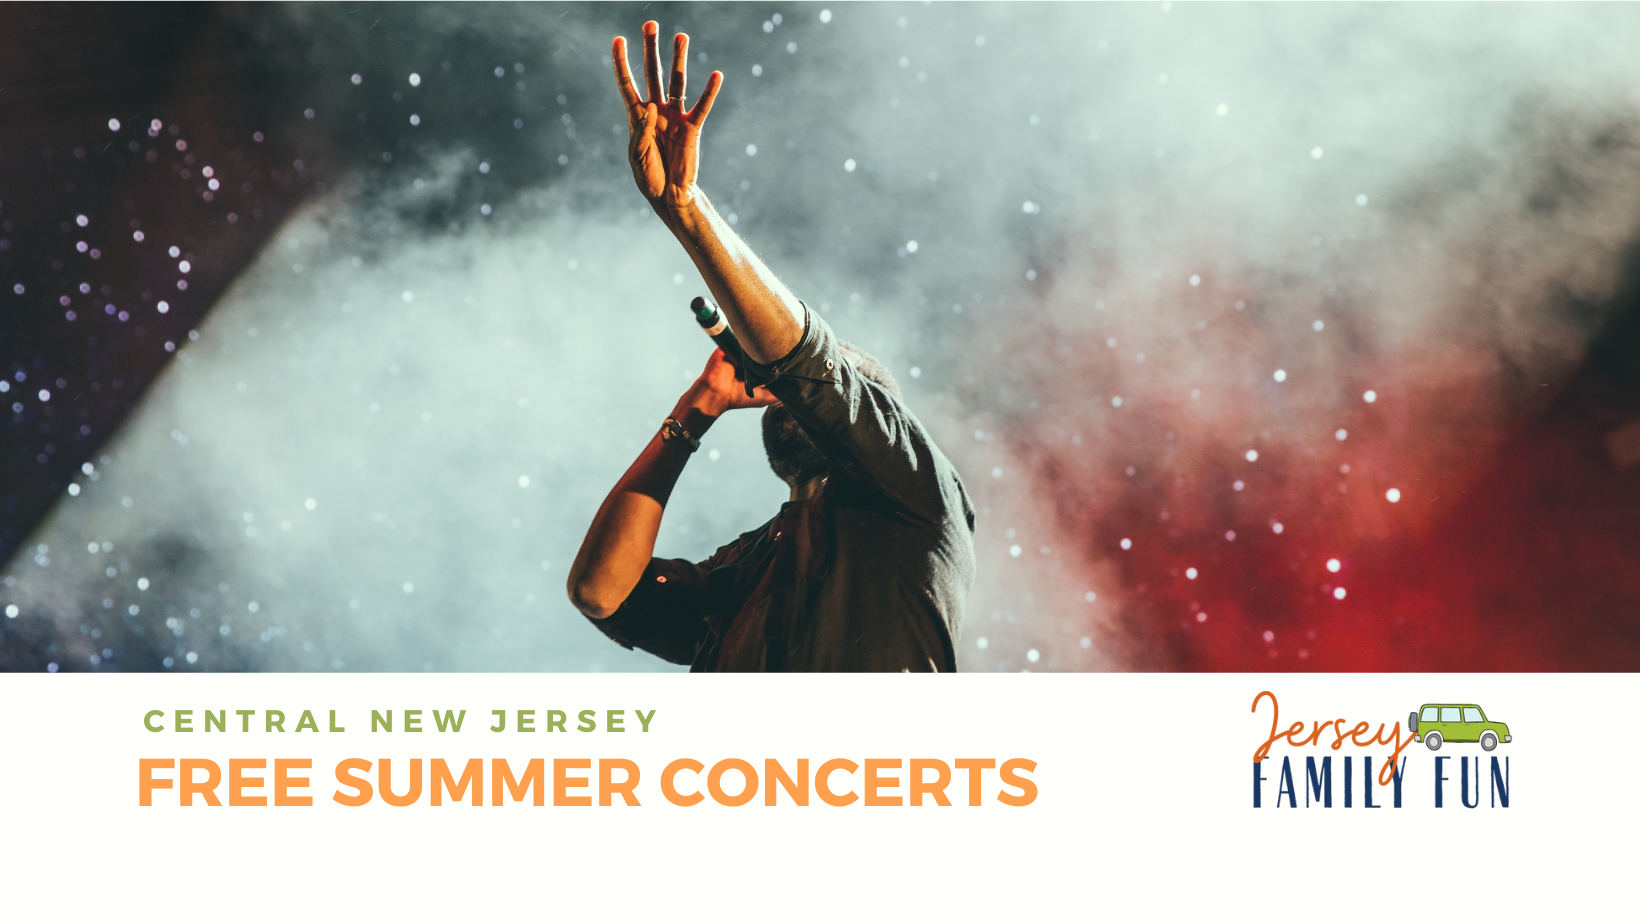 Central New Jersey Free Summer Concerts image